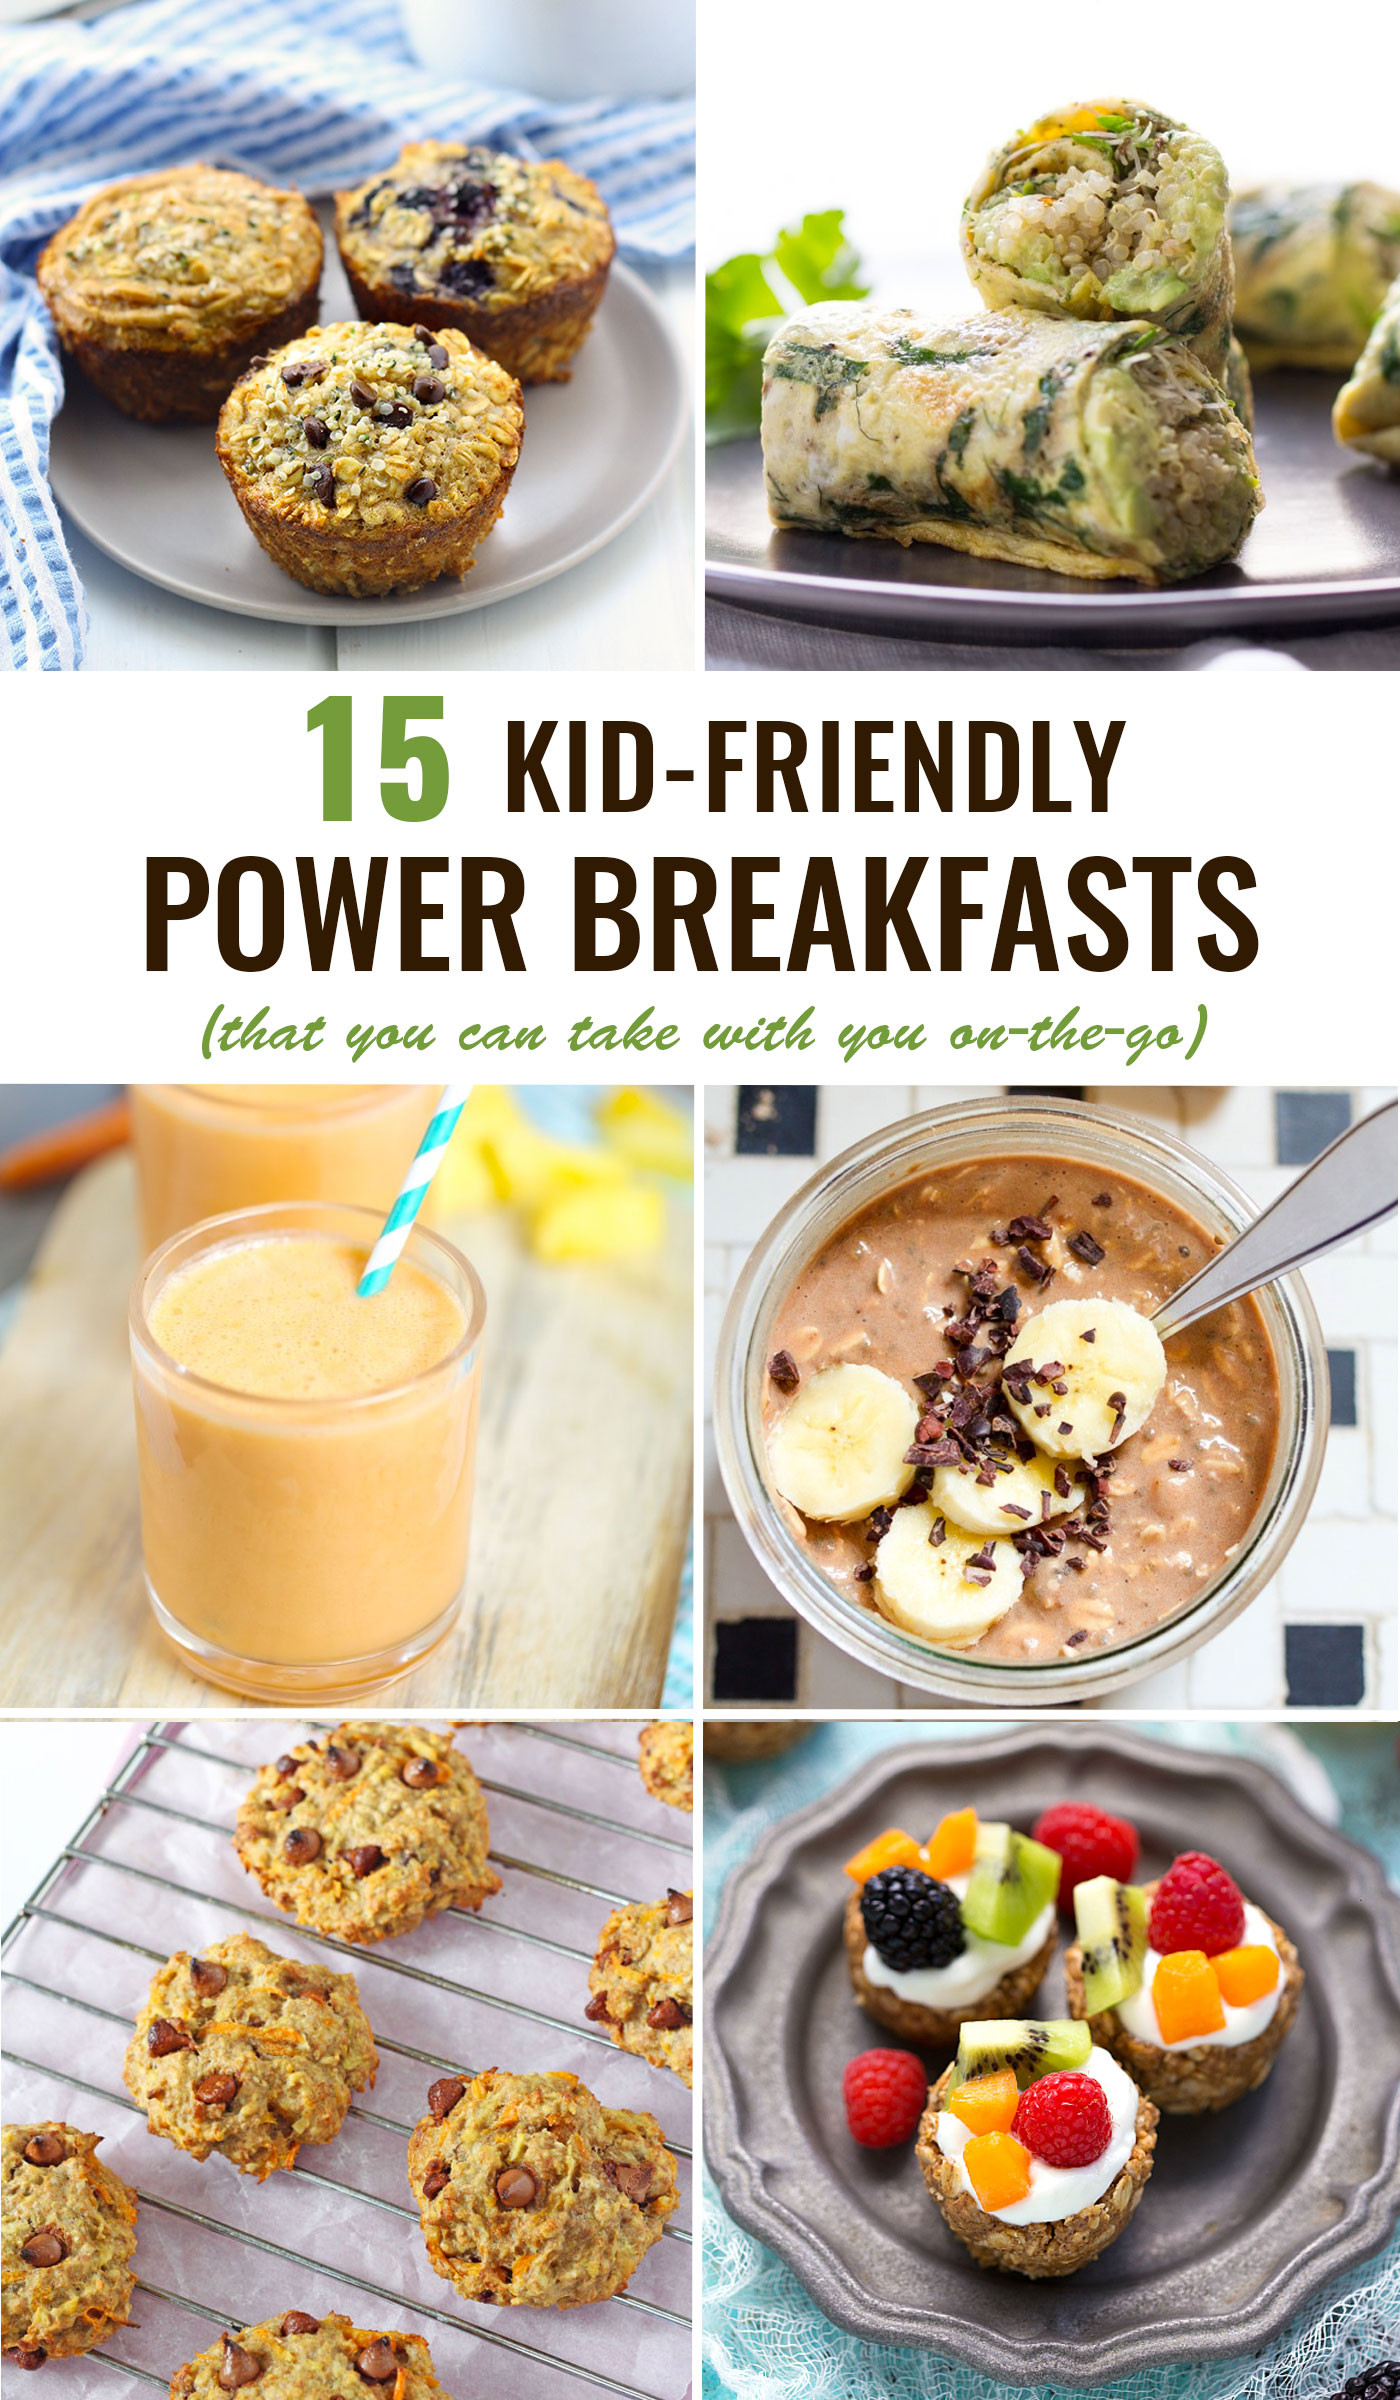 The Best Ideas for Healthy Breakfast Ideas On the Go - Best Recipes